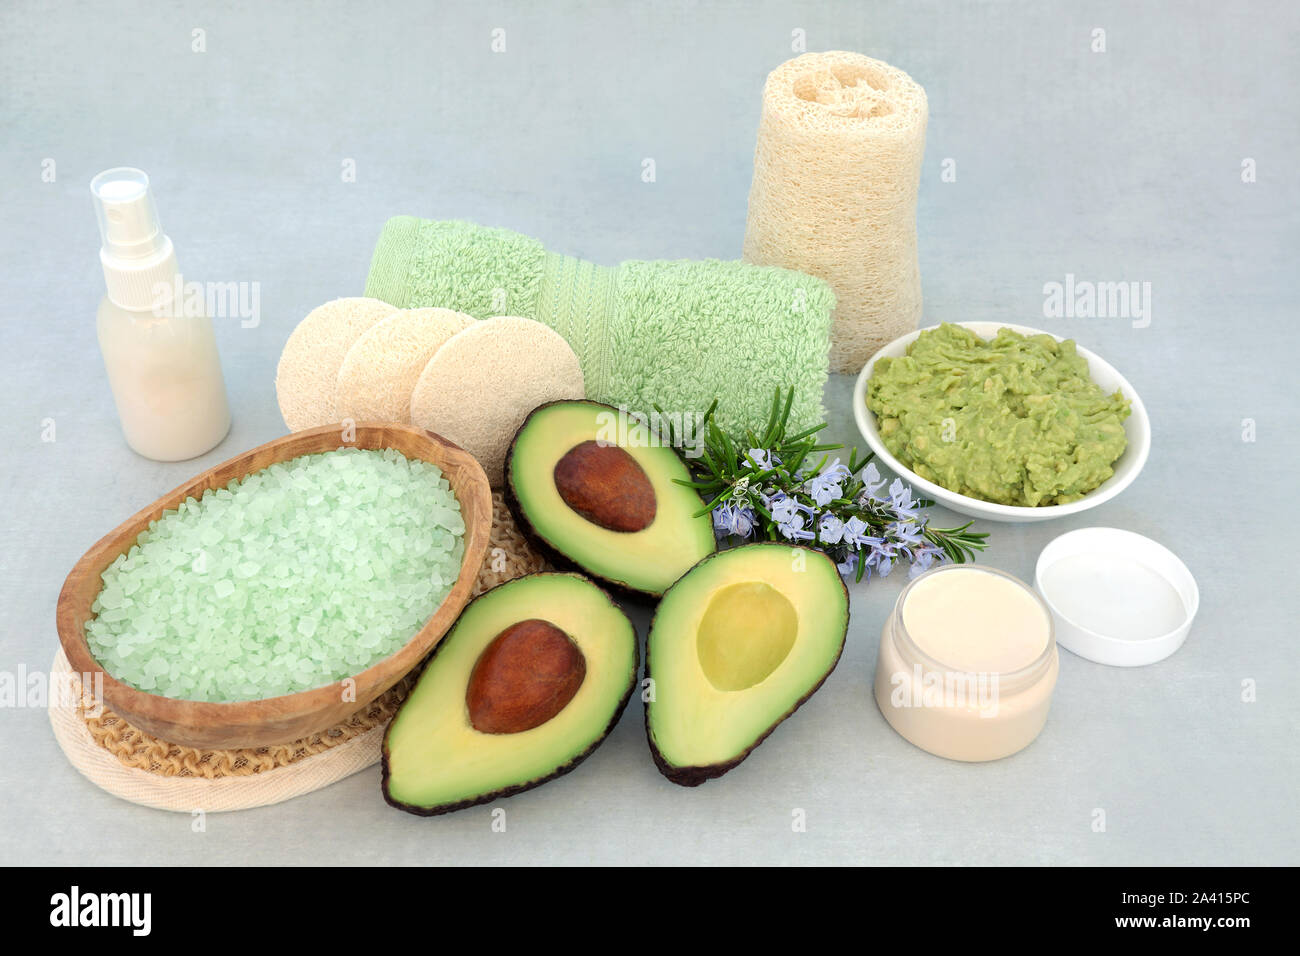 Beauty treatment for skincare with avocado face mask, rosemary herb, exfoliation mineral salts, moisturising cream,  lotion & cleansing products. Stock Photo